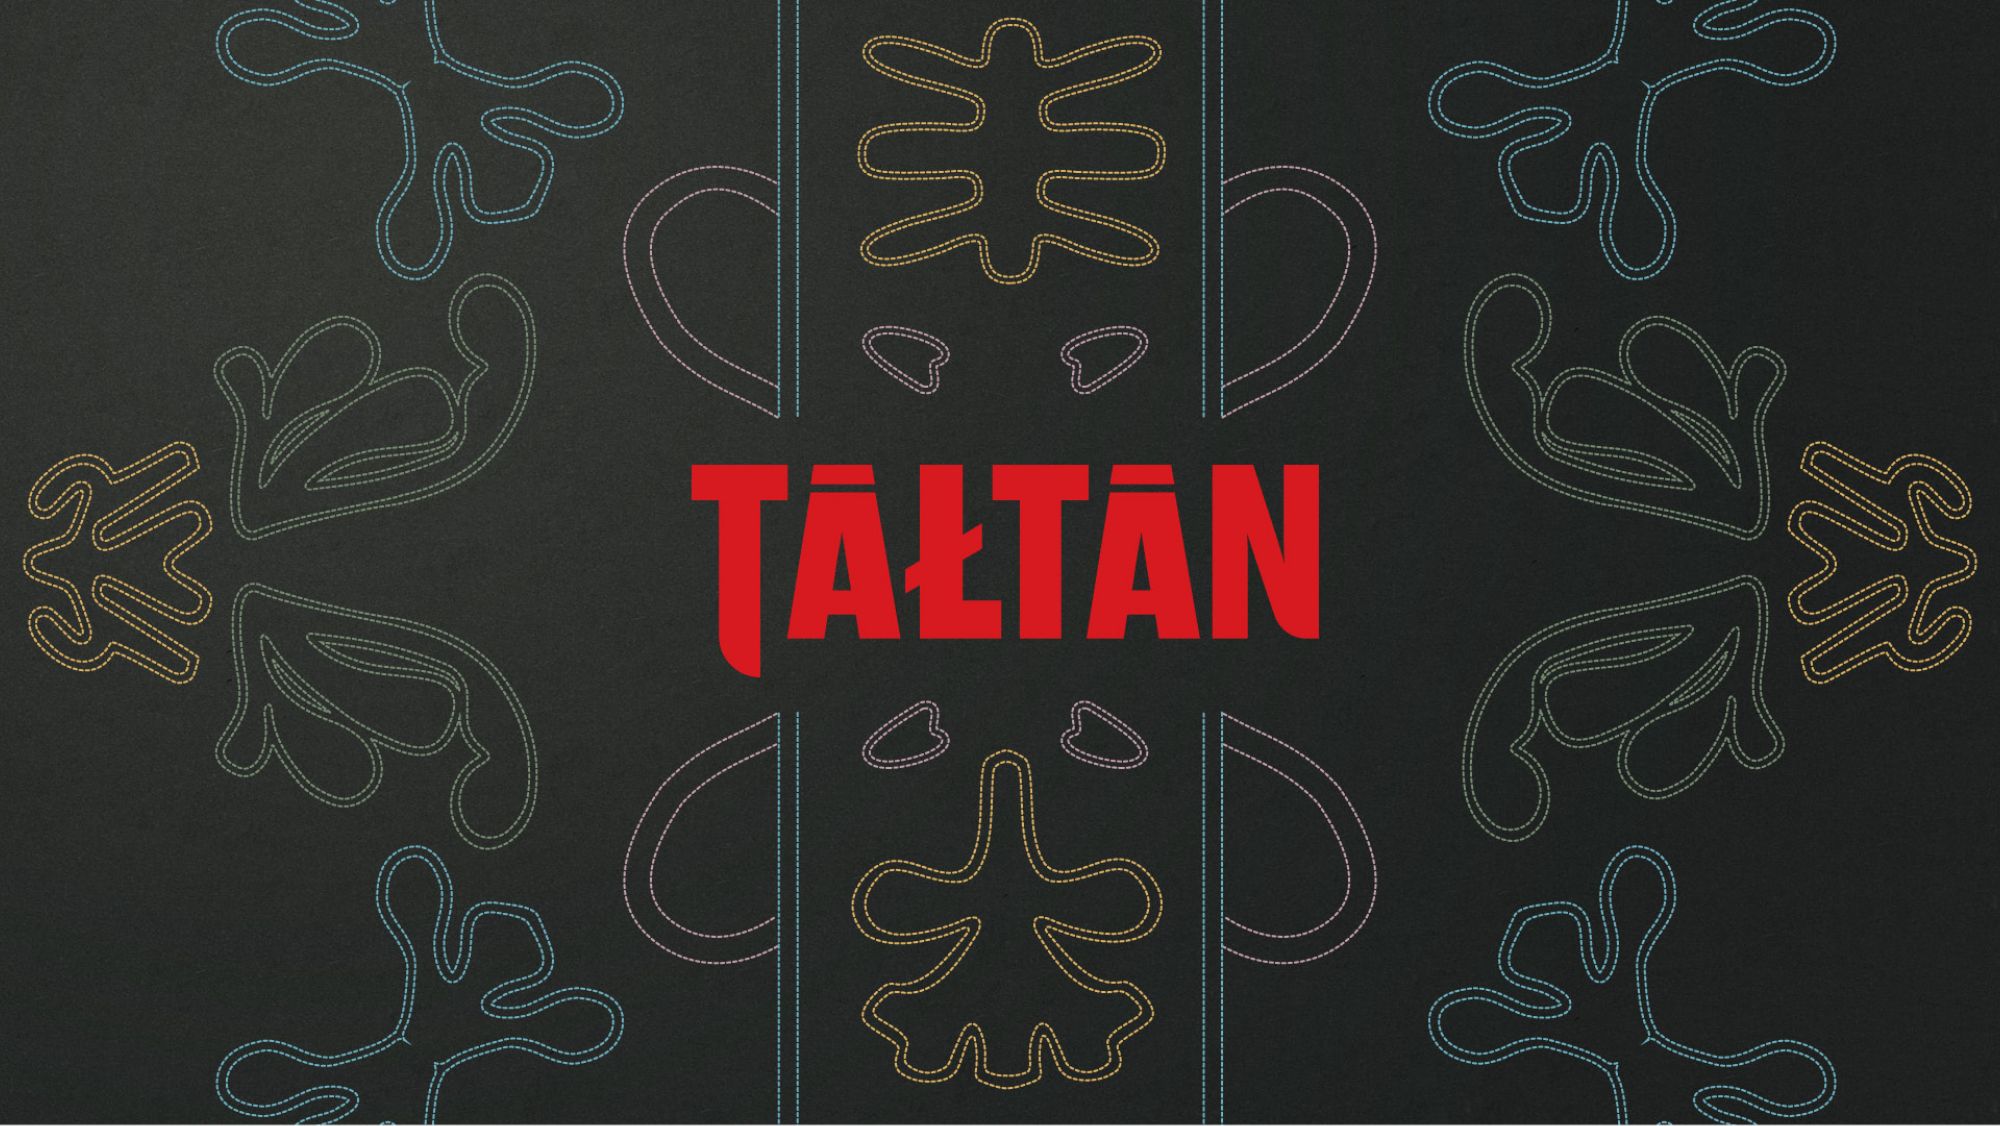 Tahltan Central Government Branding